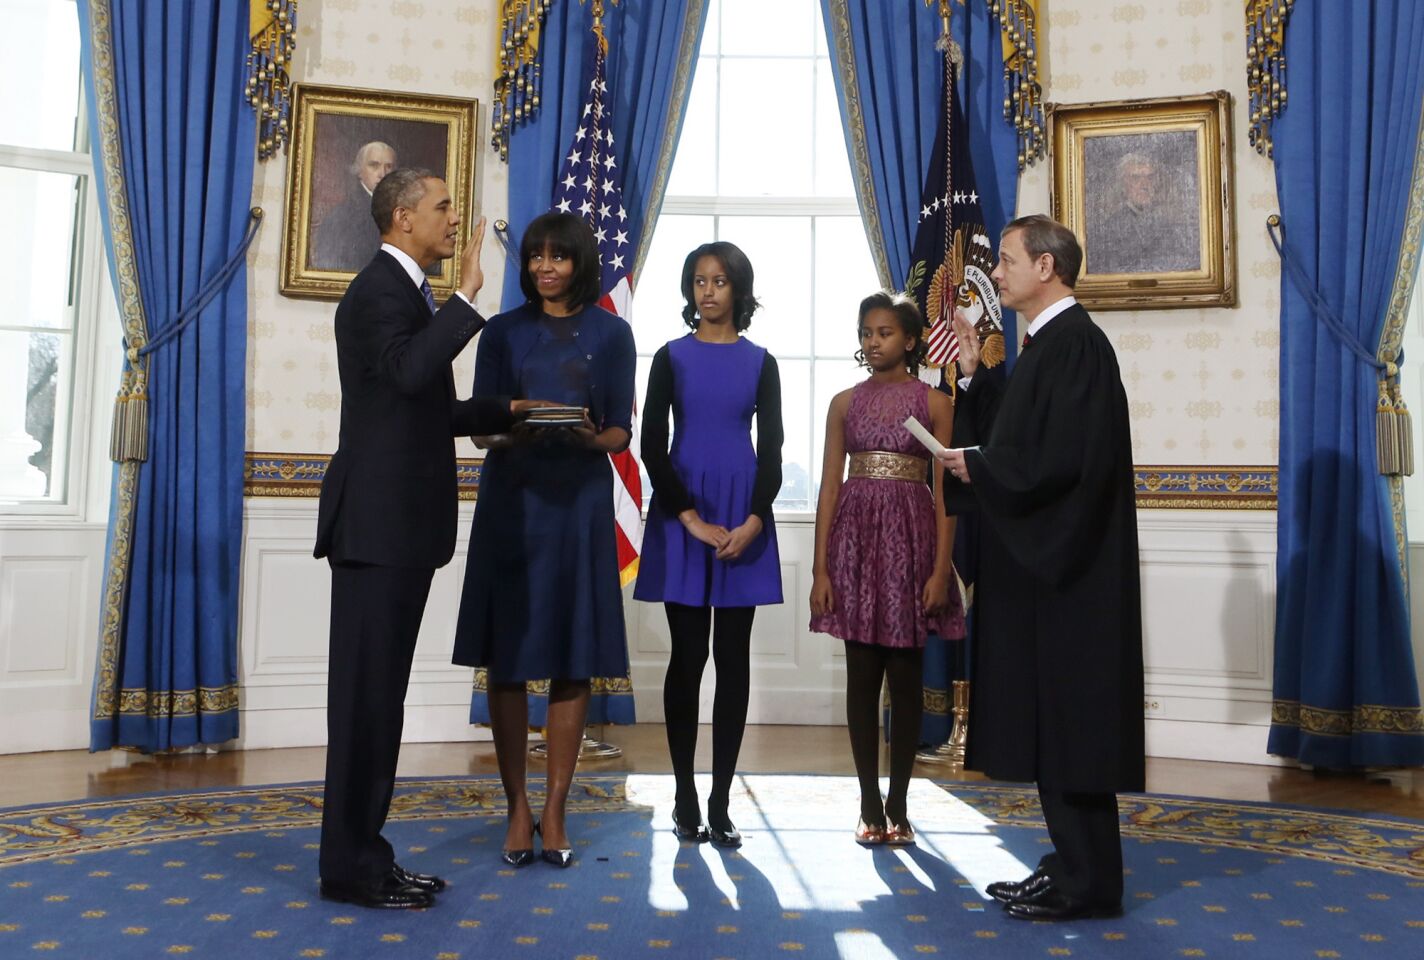 President Obama takes the oath of office from Chief Justice John G. Roberts Jr. in the company of First Lady Michelle Obama and their daughters Malia and Sasha in the Blue Room of the White House.